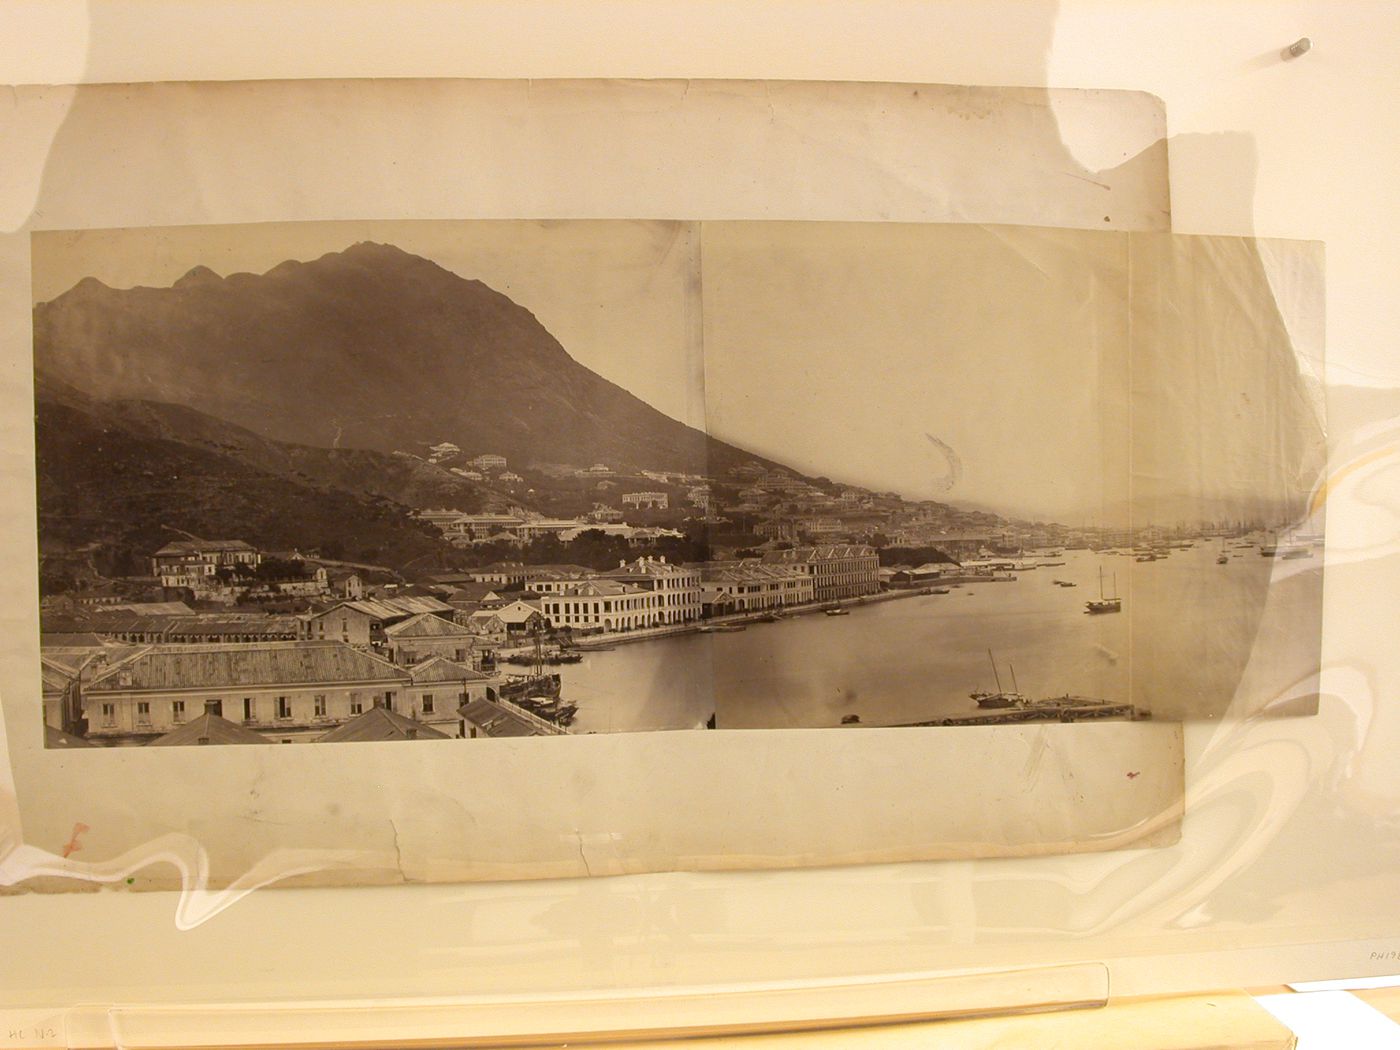 View of Victoria Harbour and Victoria Peak with the godowns of Jardine Matheson in the foreground, Hong Kong (now Hong Kong, China)